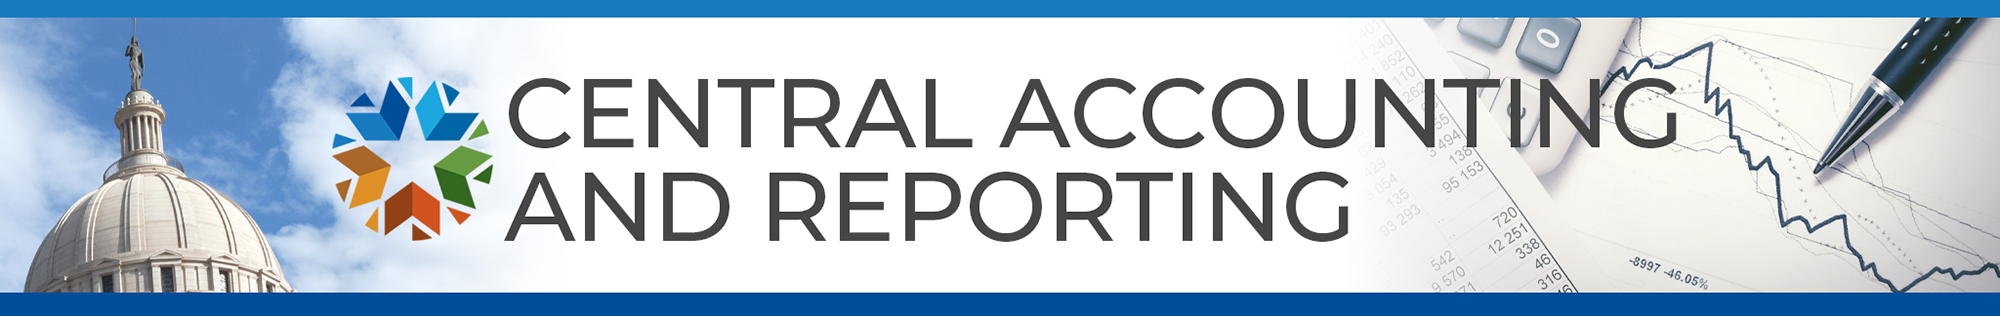 Central Accounting & Reporting banner